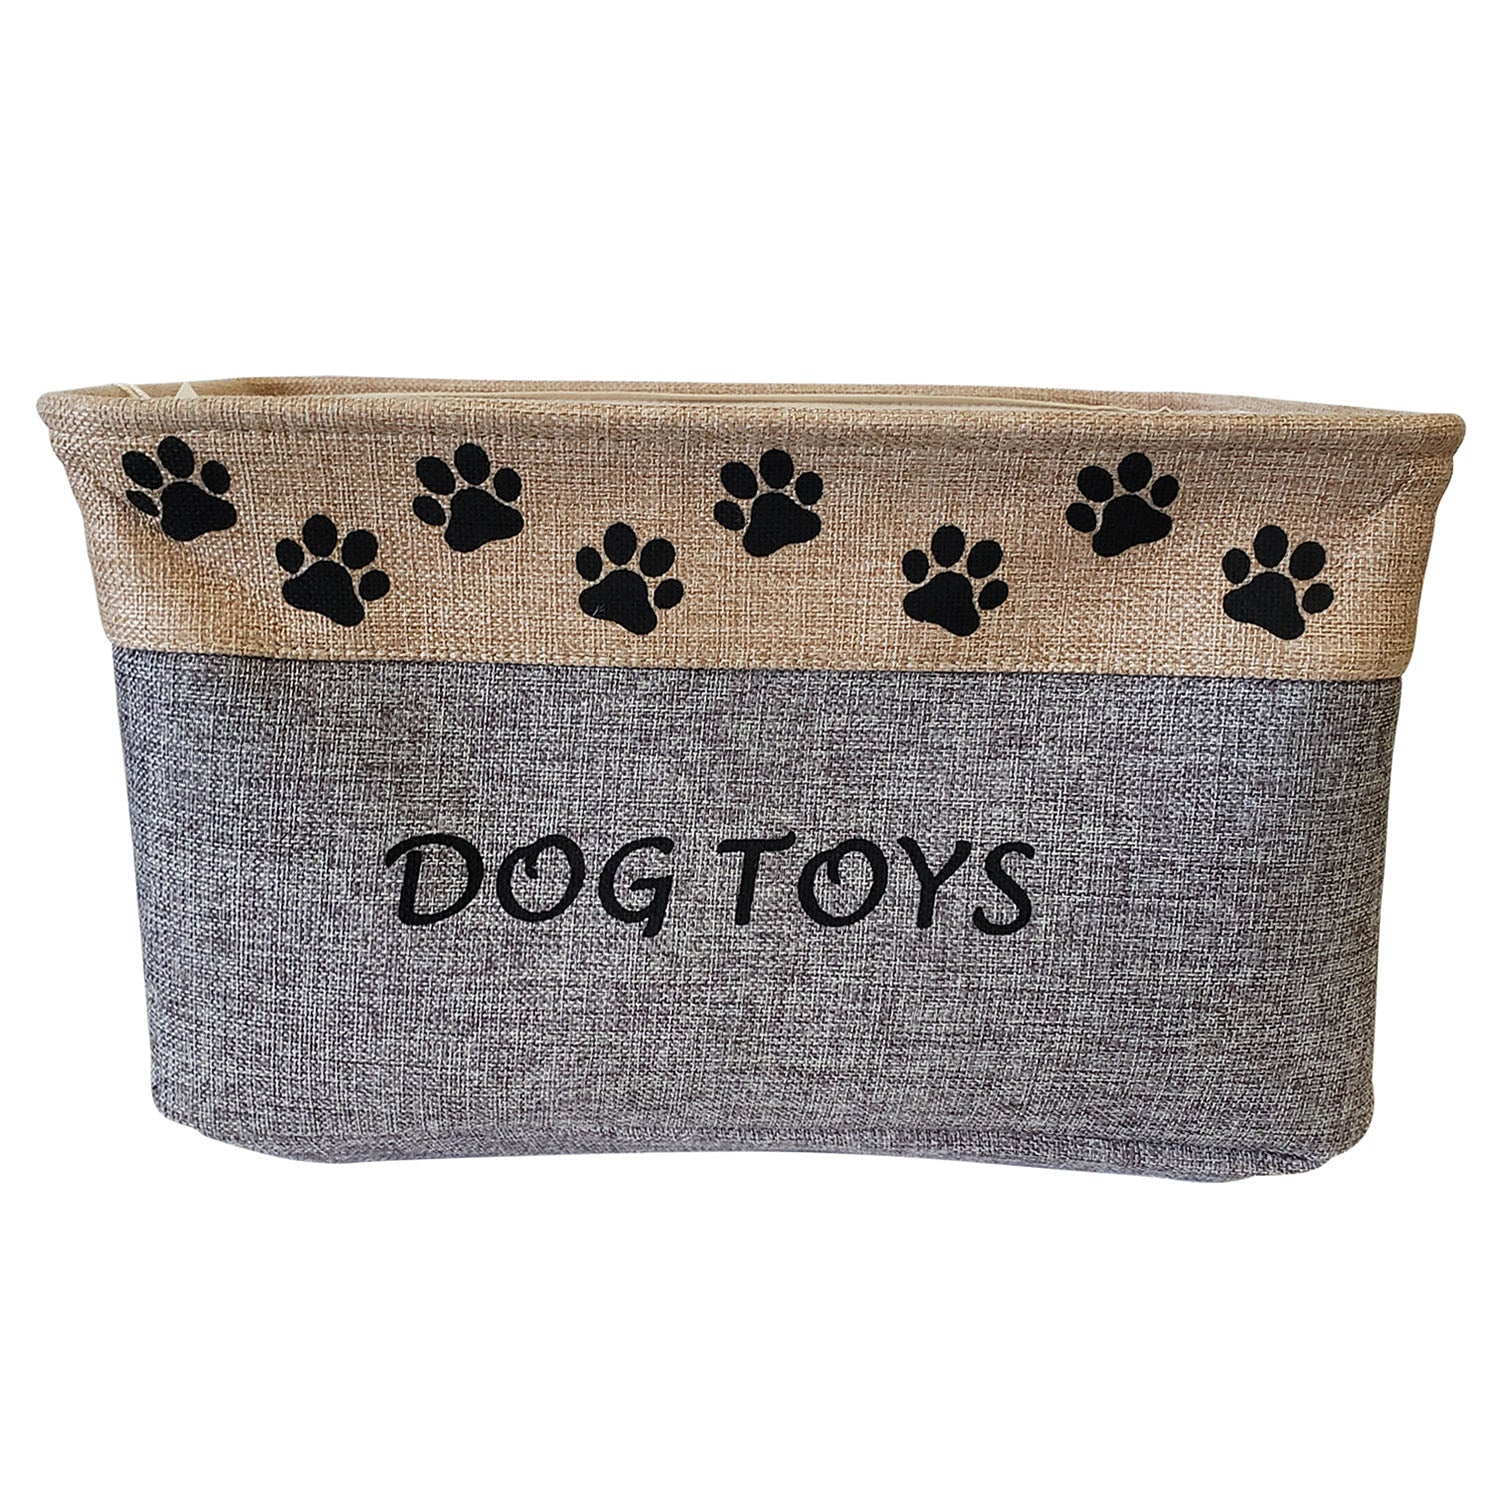 FRISCO Square Collapsible Pet Toy Storage Bin, Gray Basket Weave